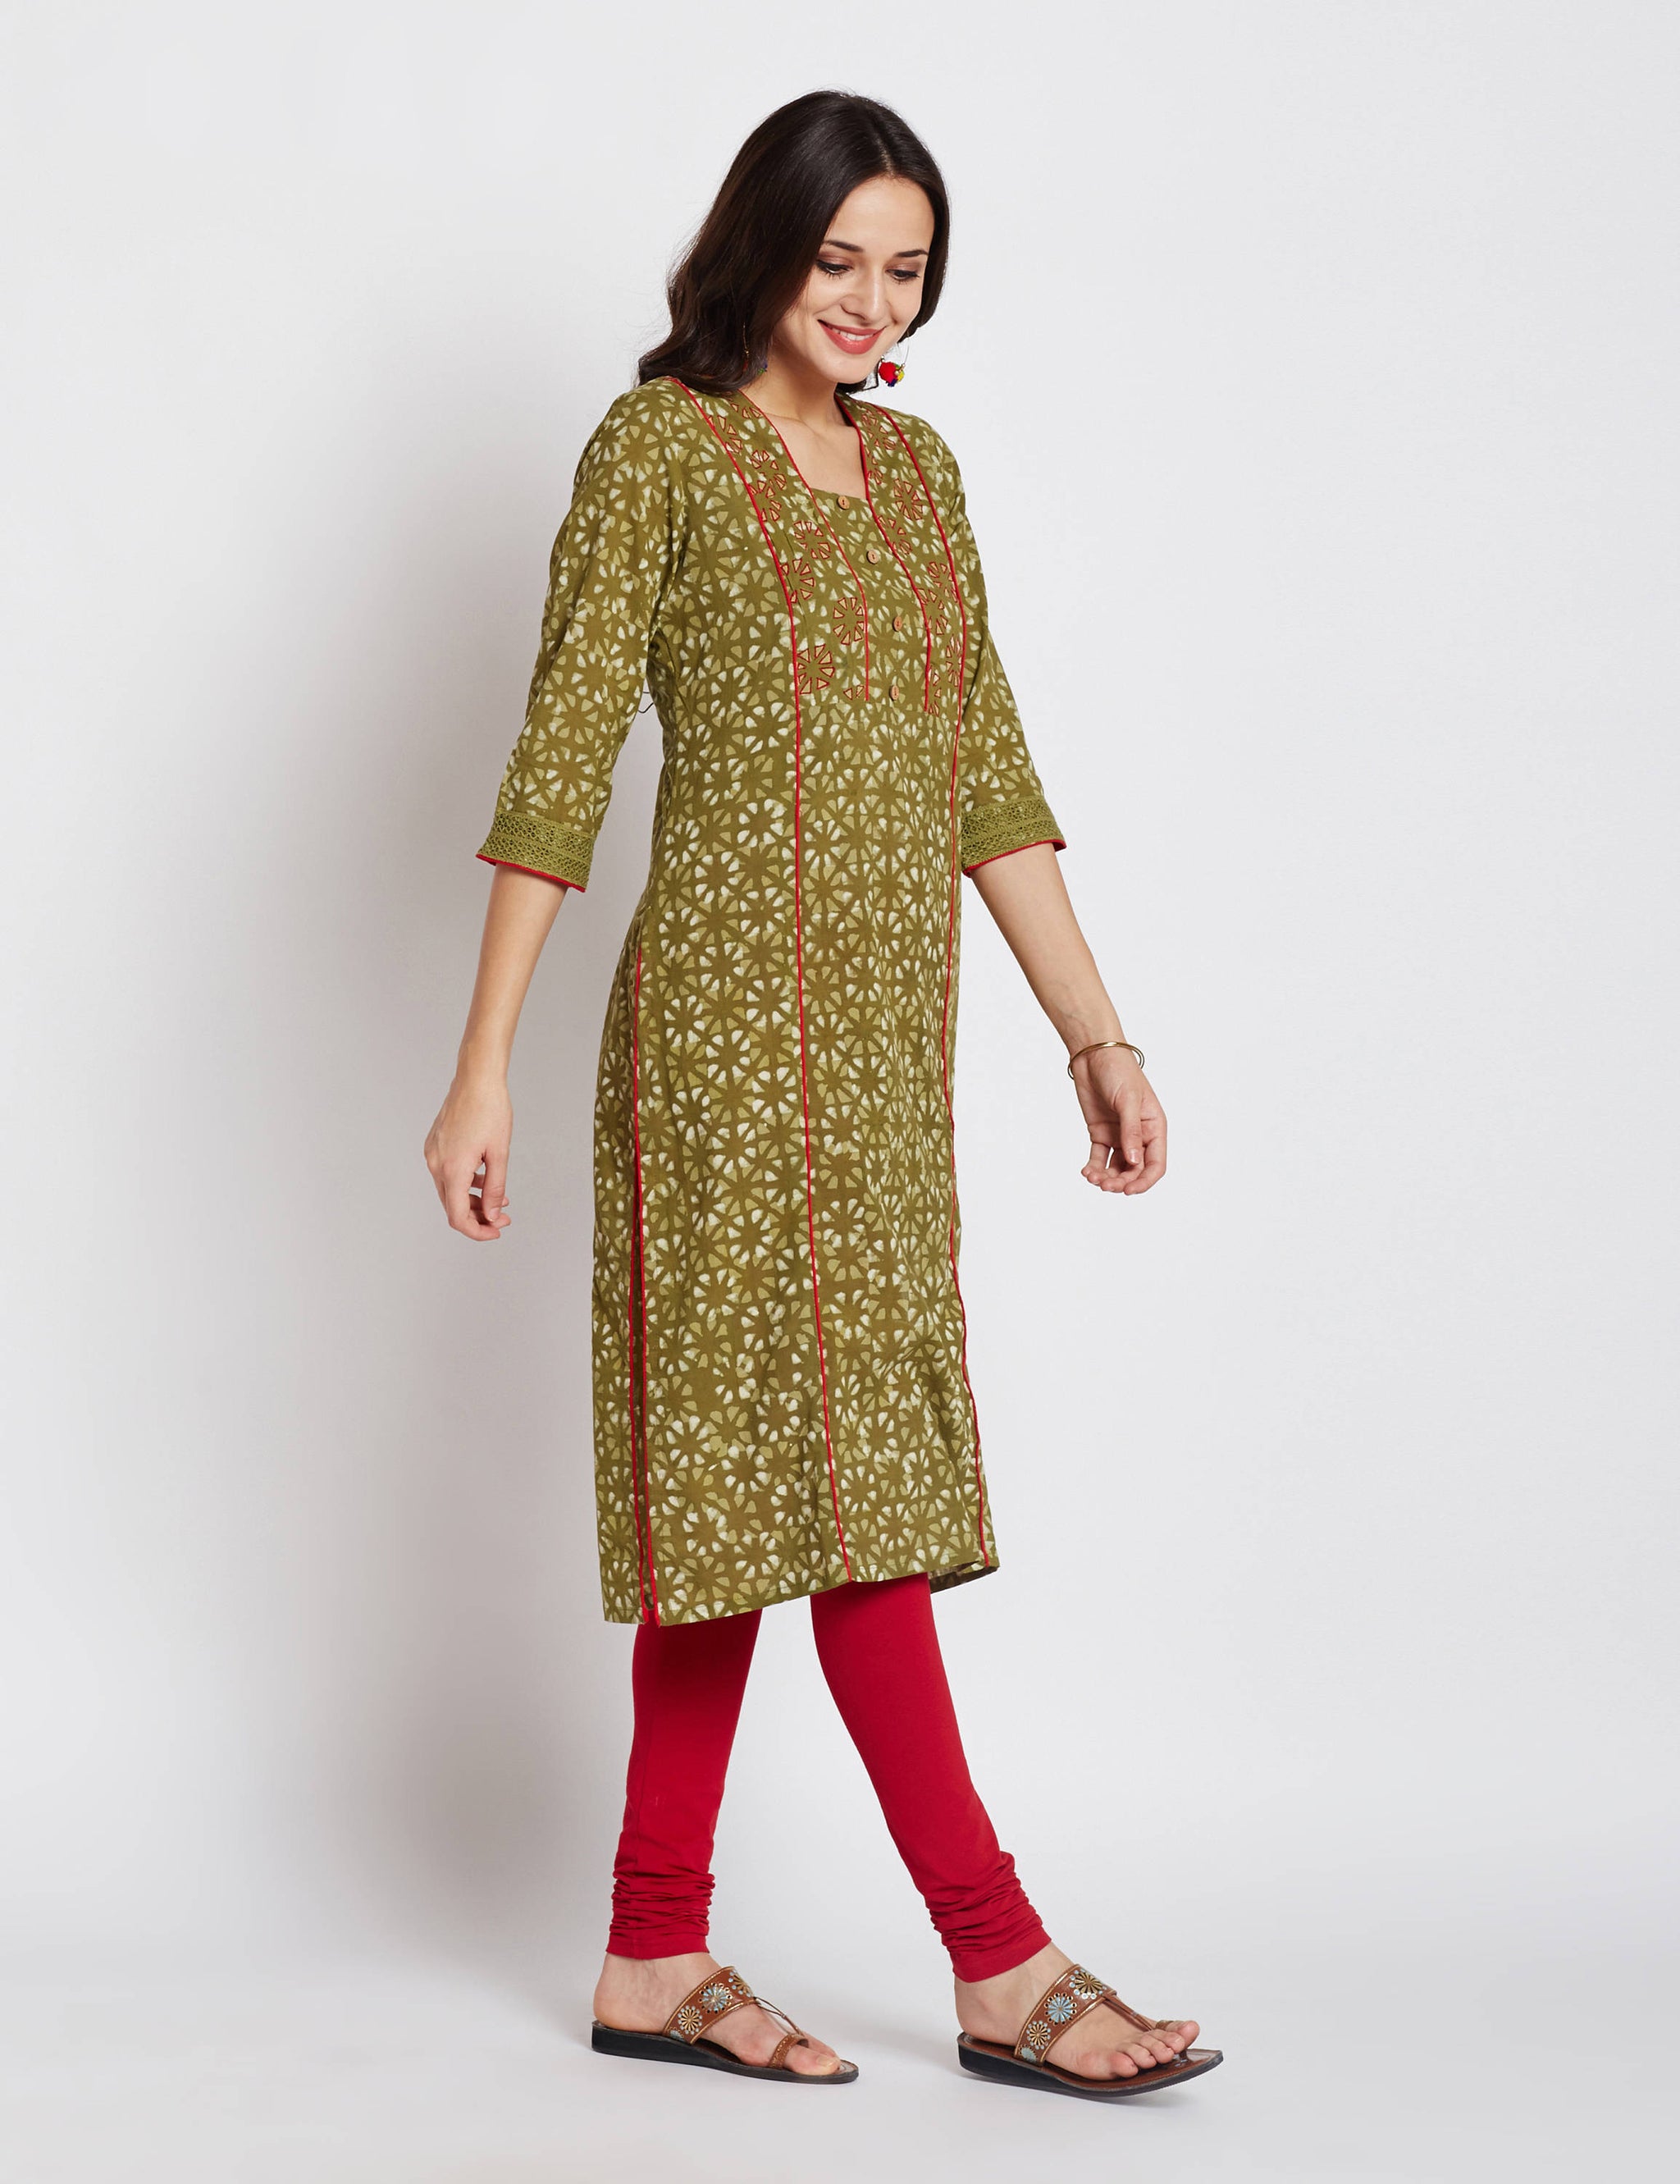 Hand block dabu printed ethnic long Indian kurta with trims on front and embroidery on neck